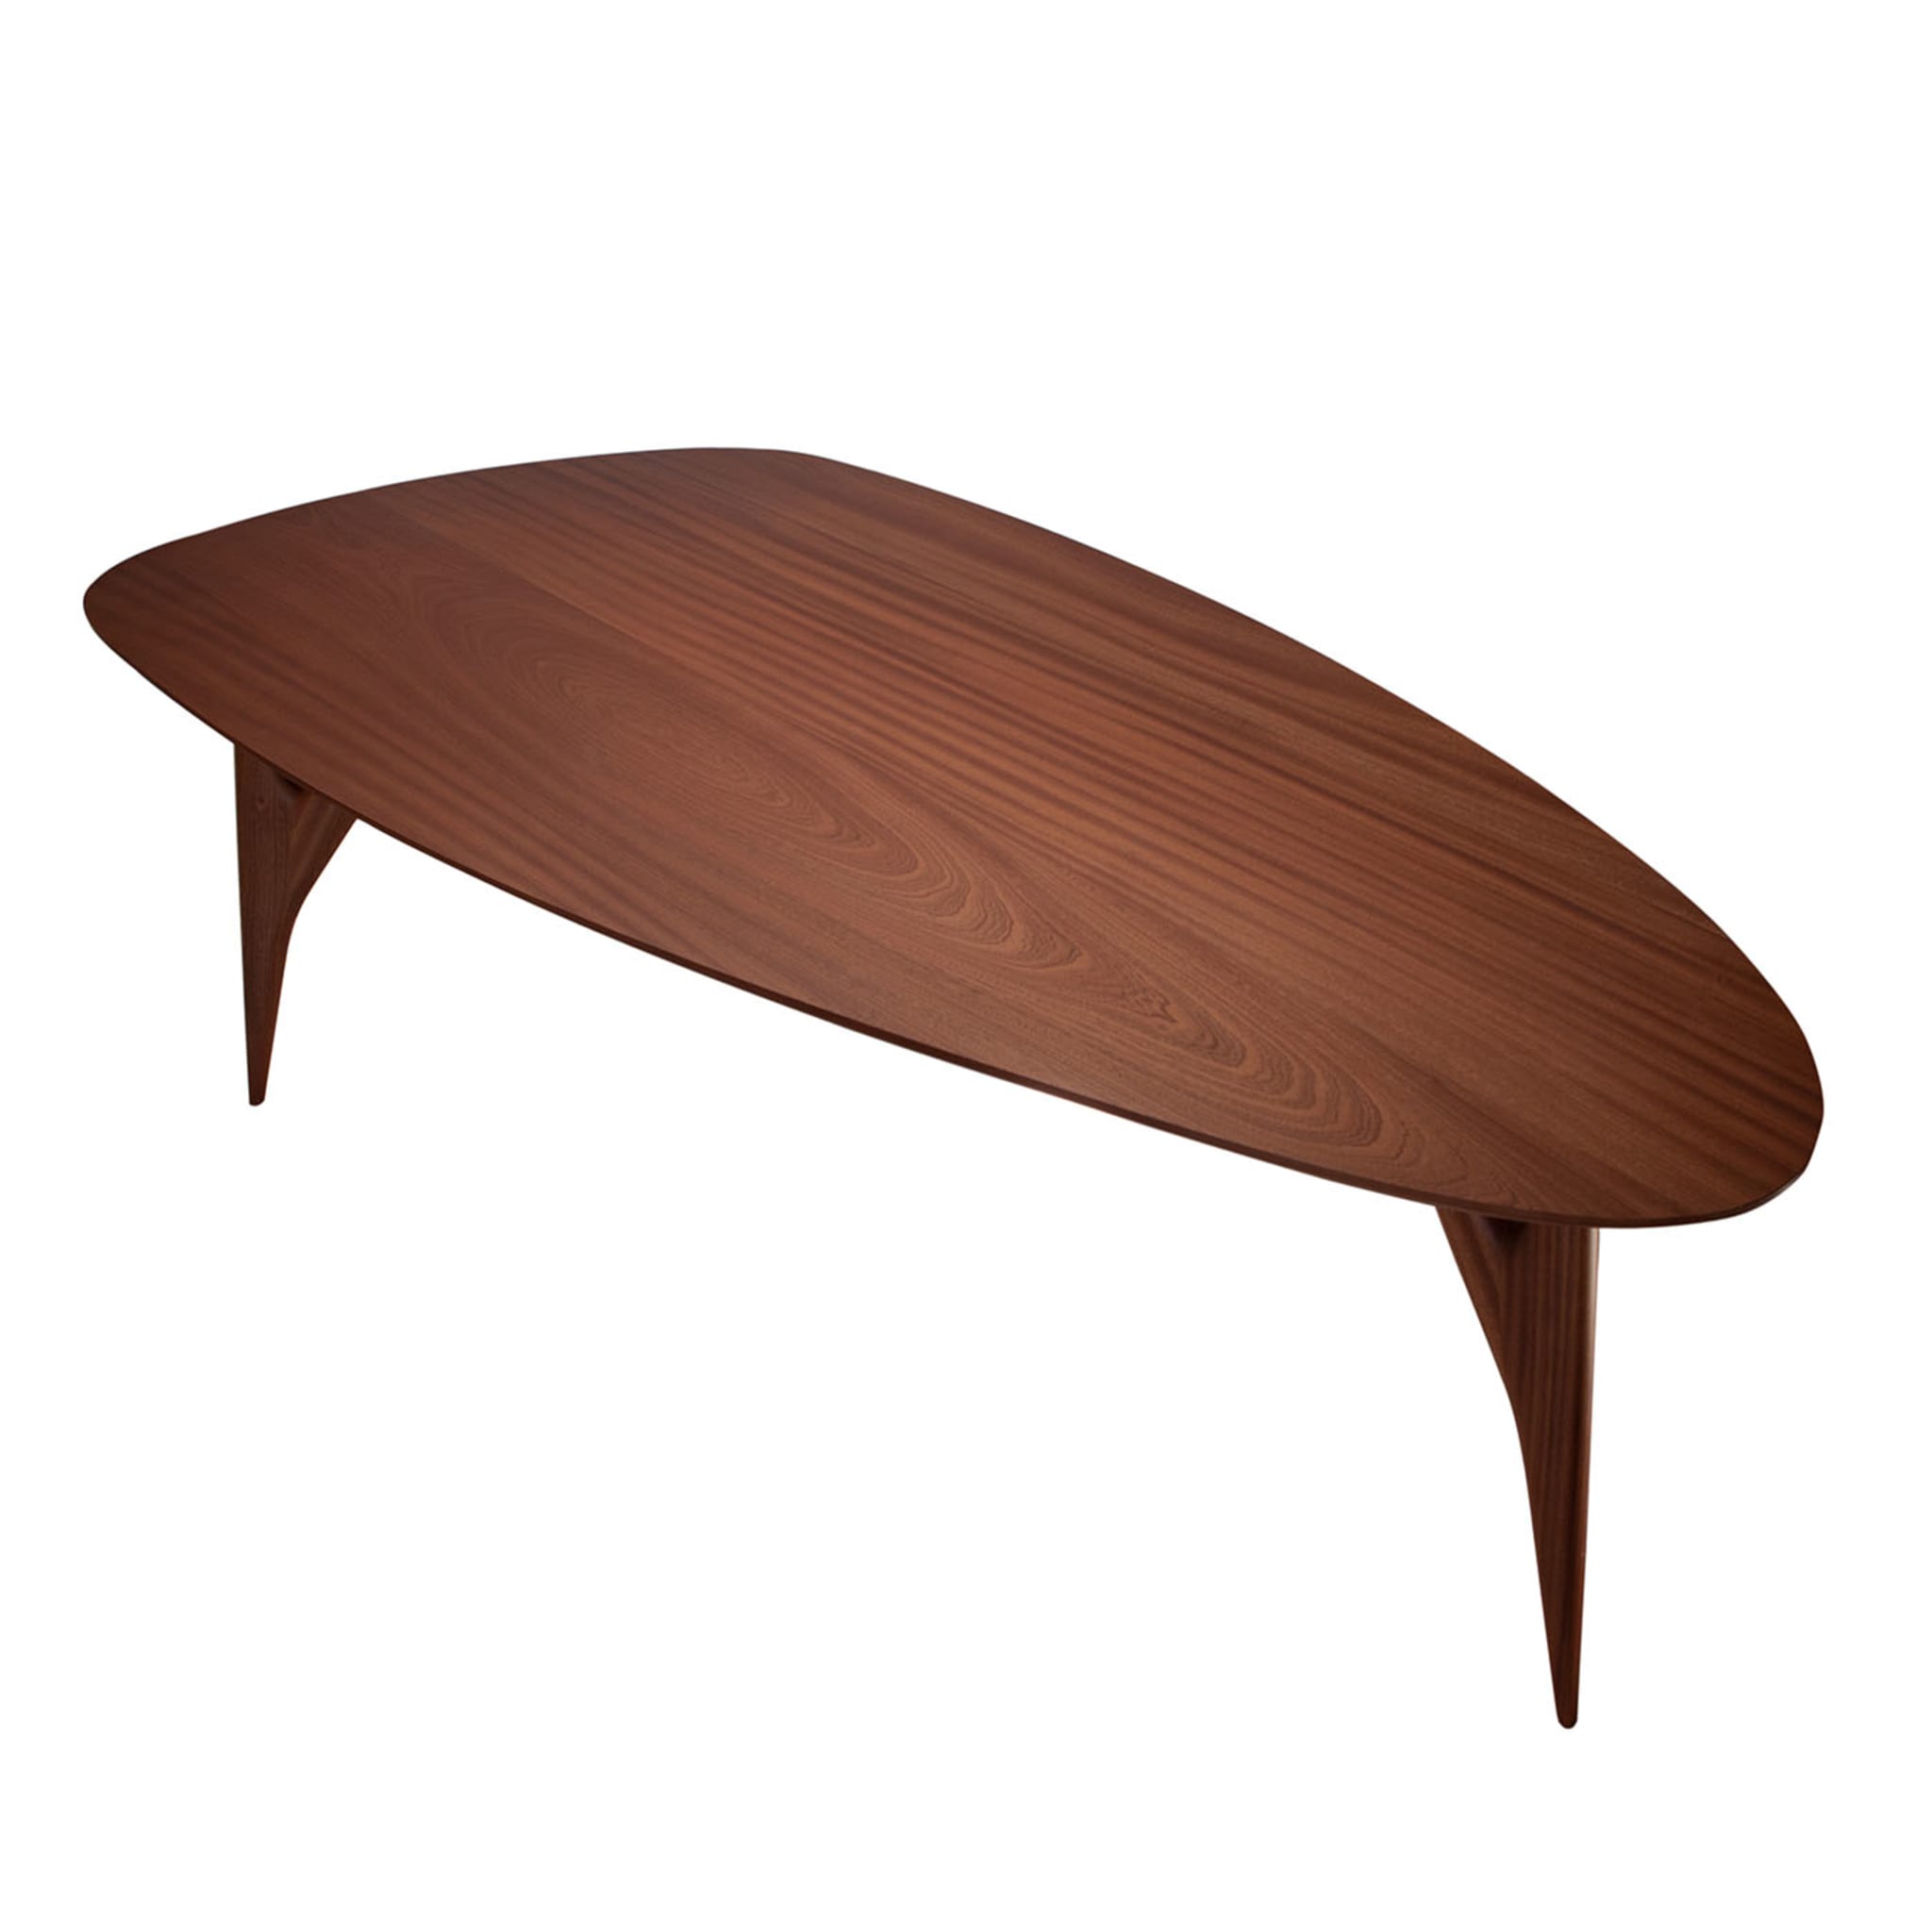 Ted Masterpiece Mahogany Large Table  - Alternative view 3